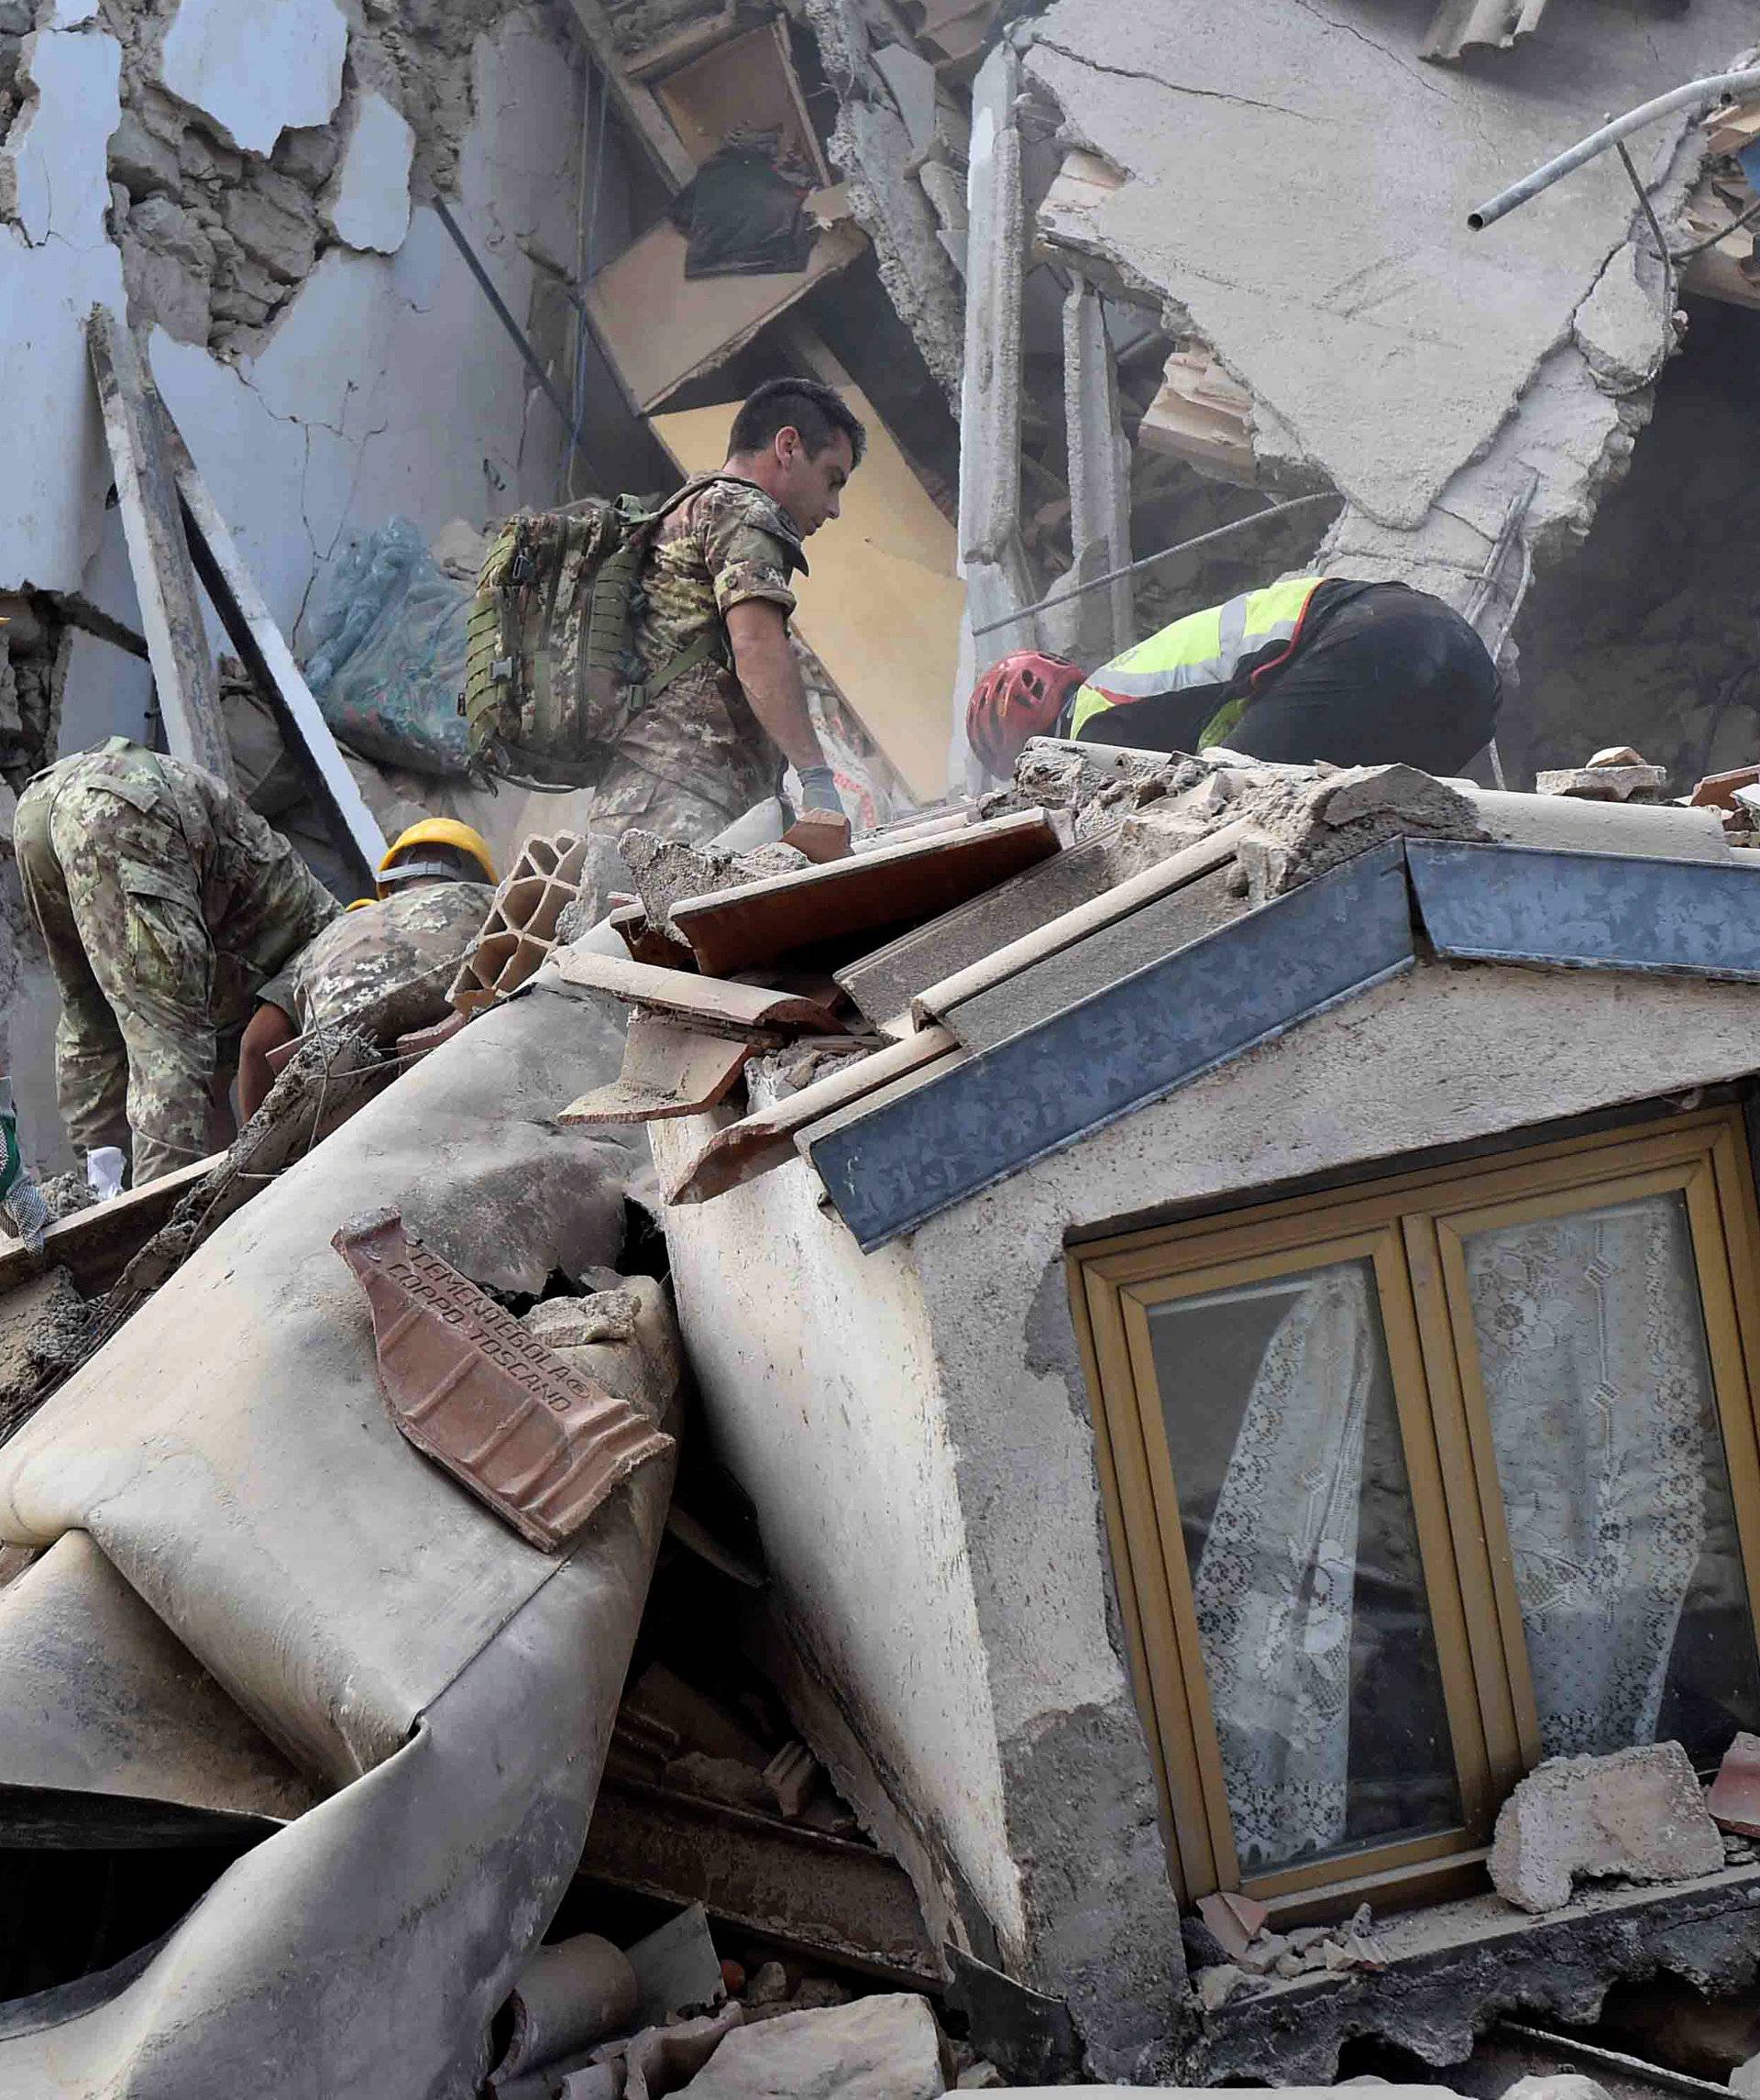 Rescuers work at a collapsed building following an earthquake in Amatrice